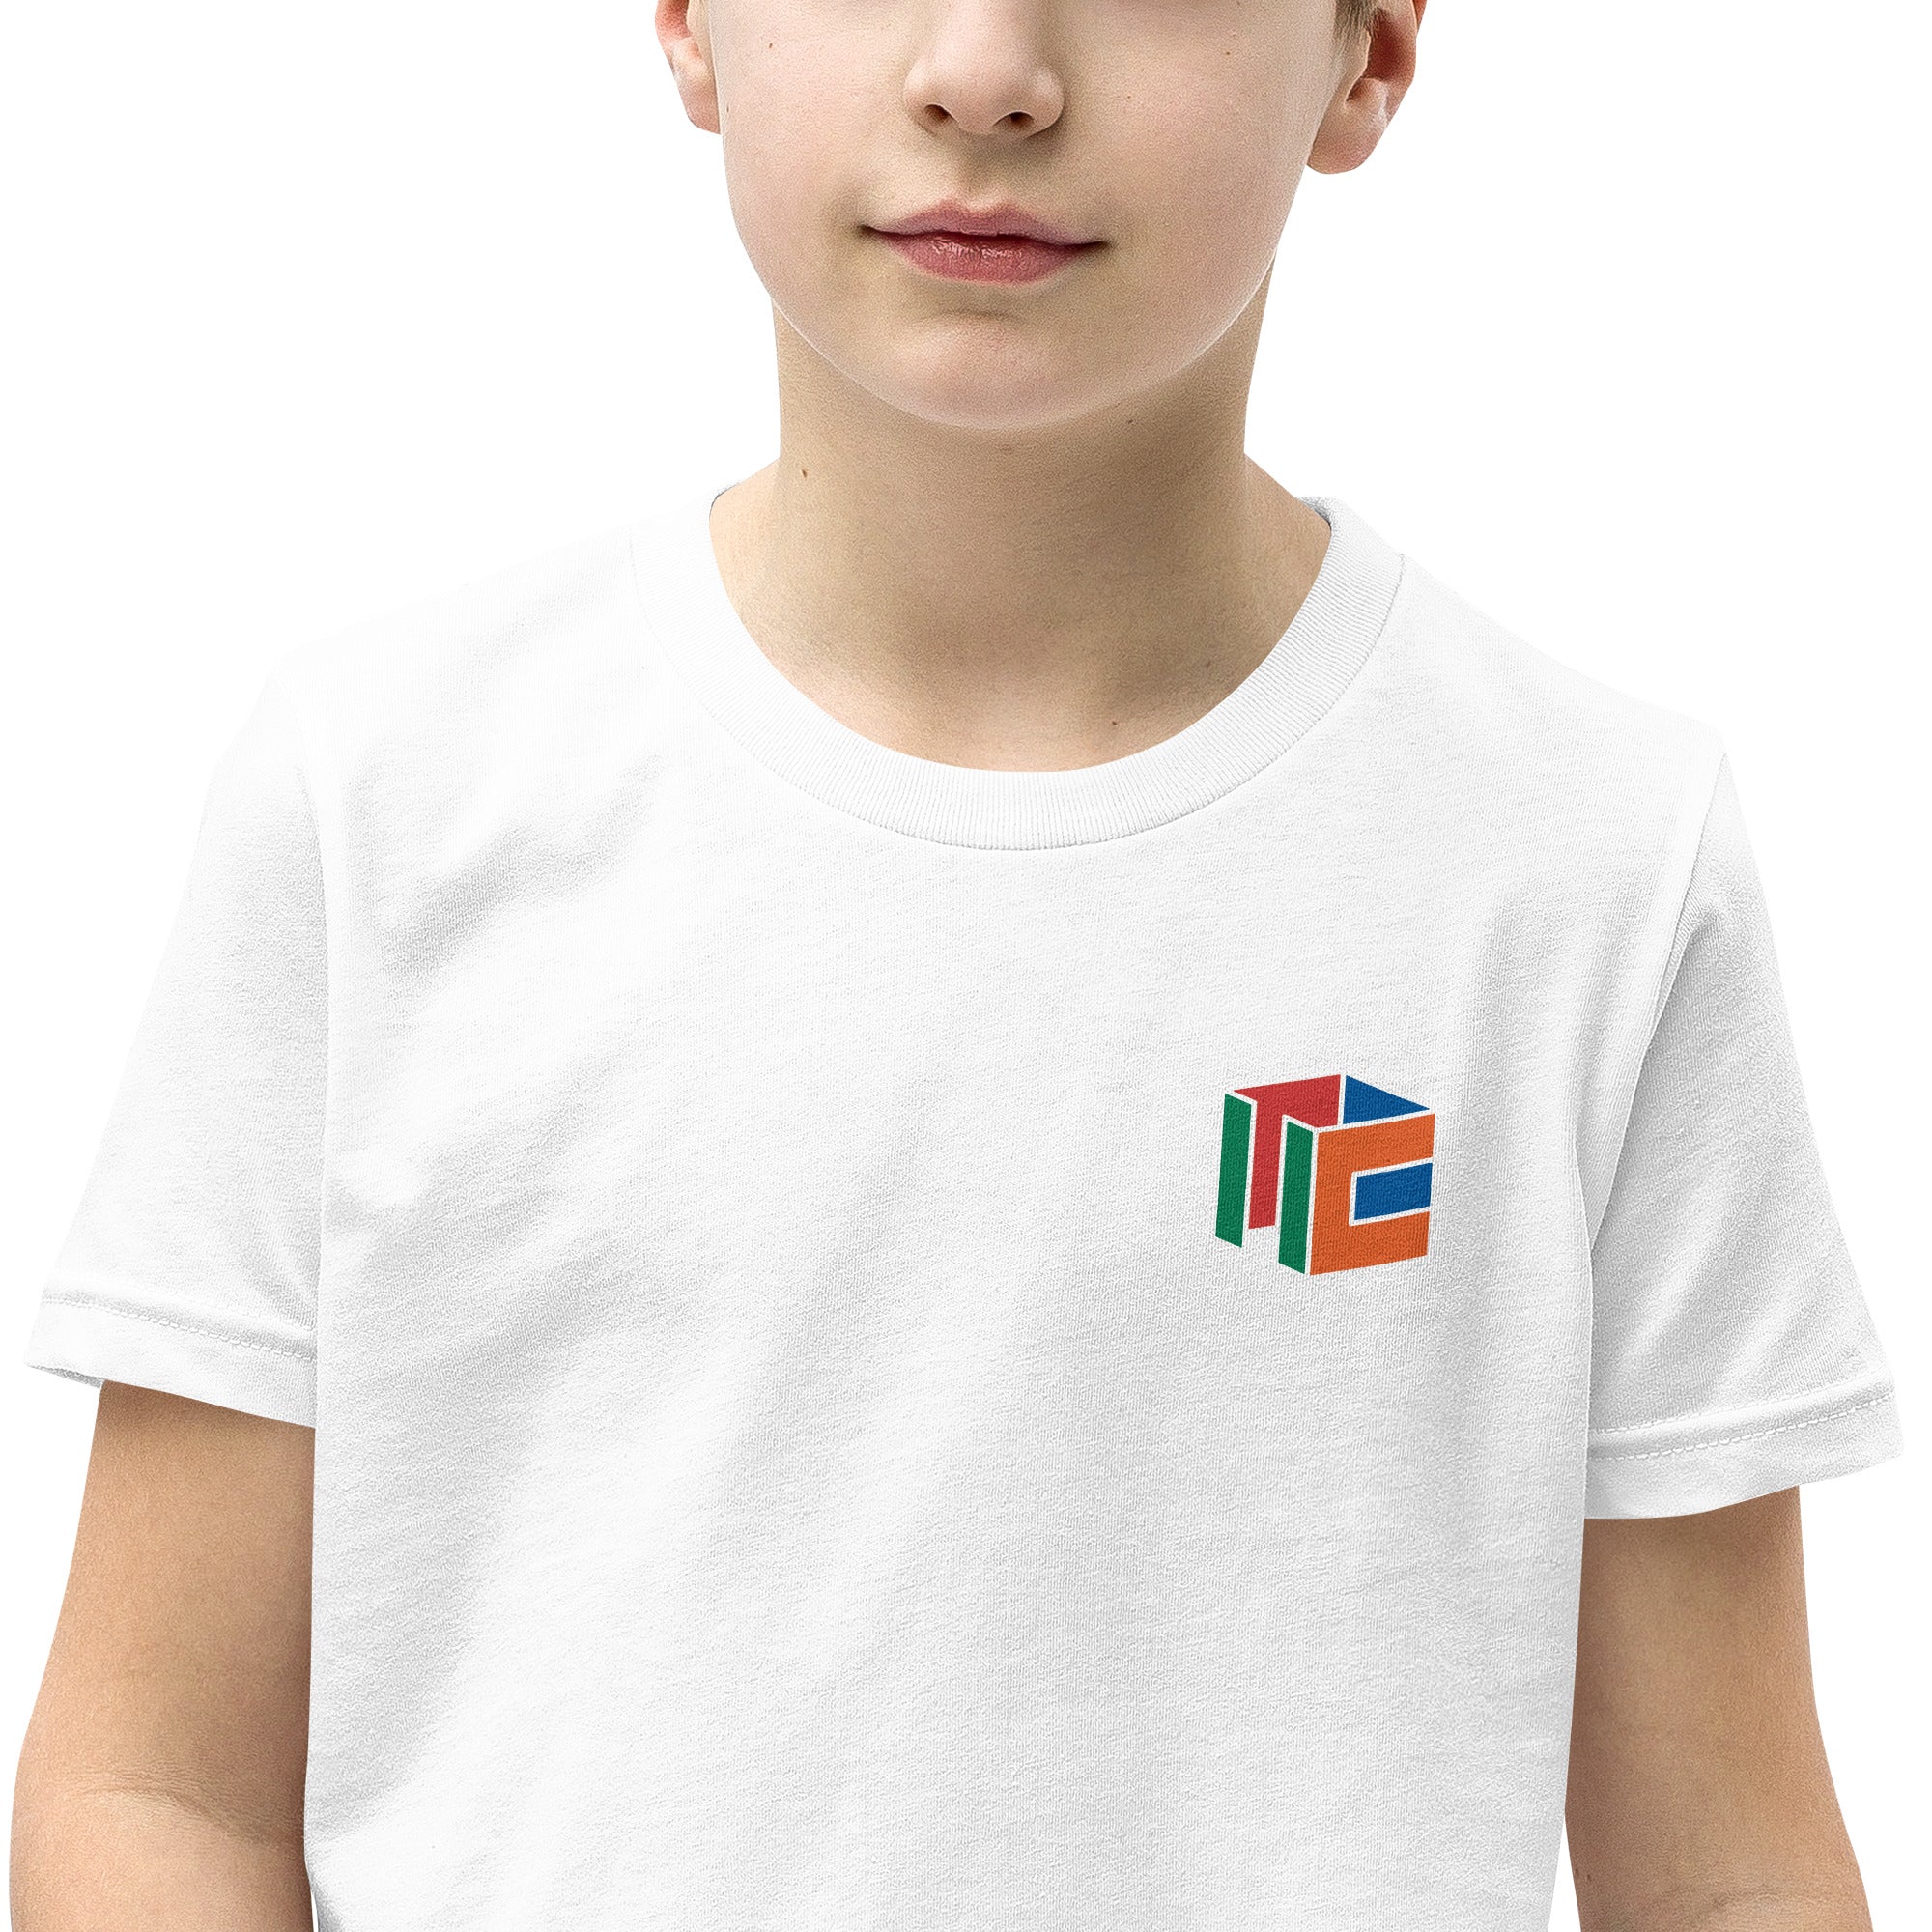 Cubicle 2022 Youth Embroidered T-shirt